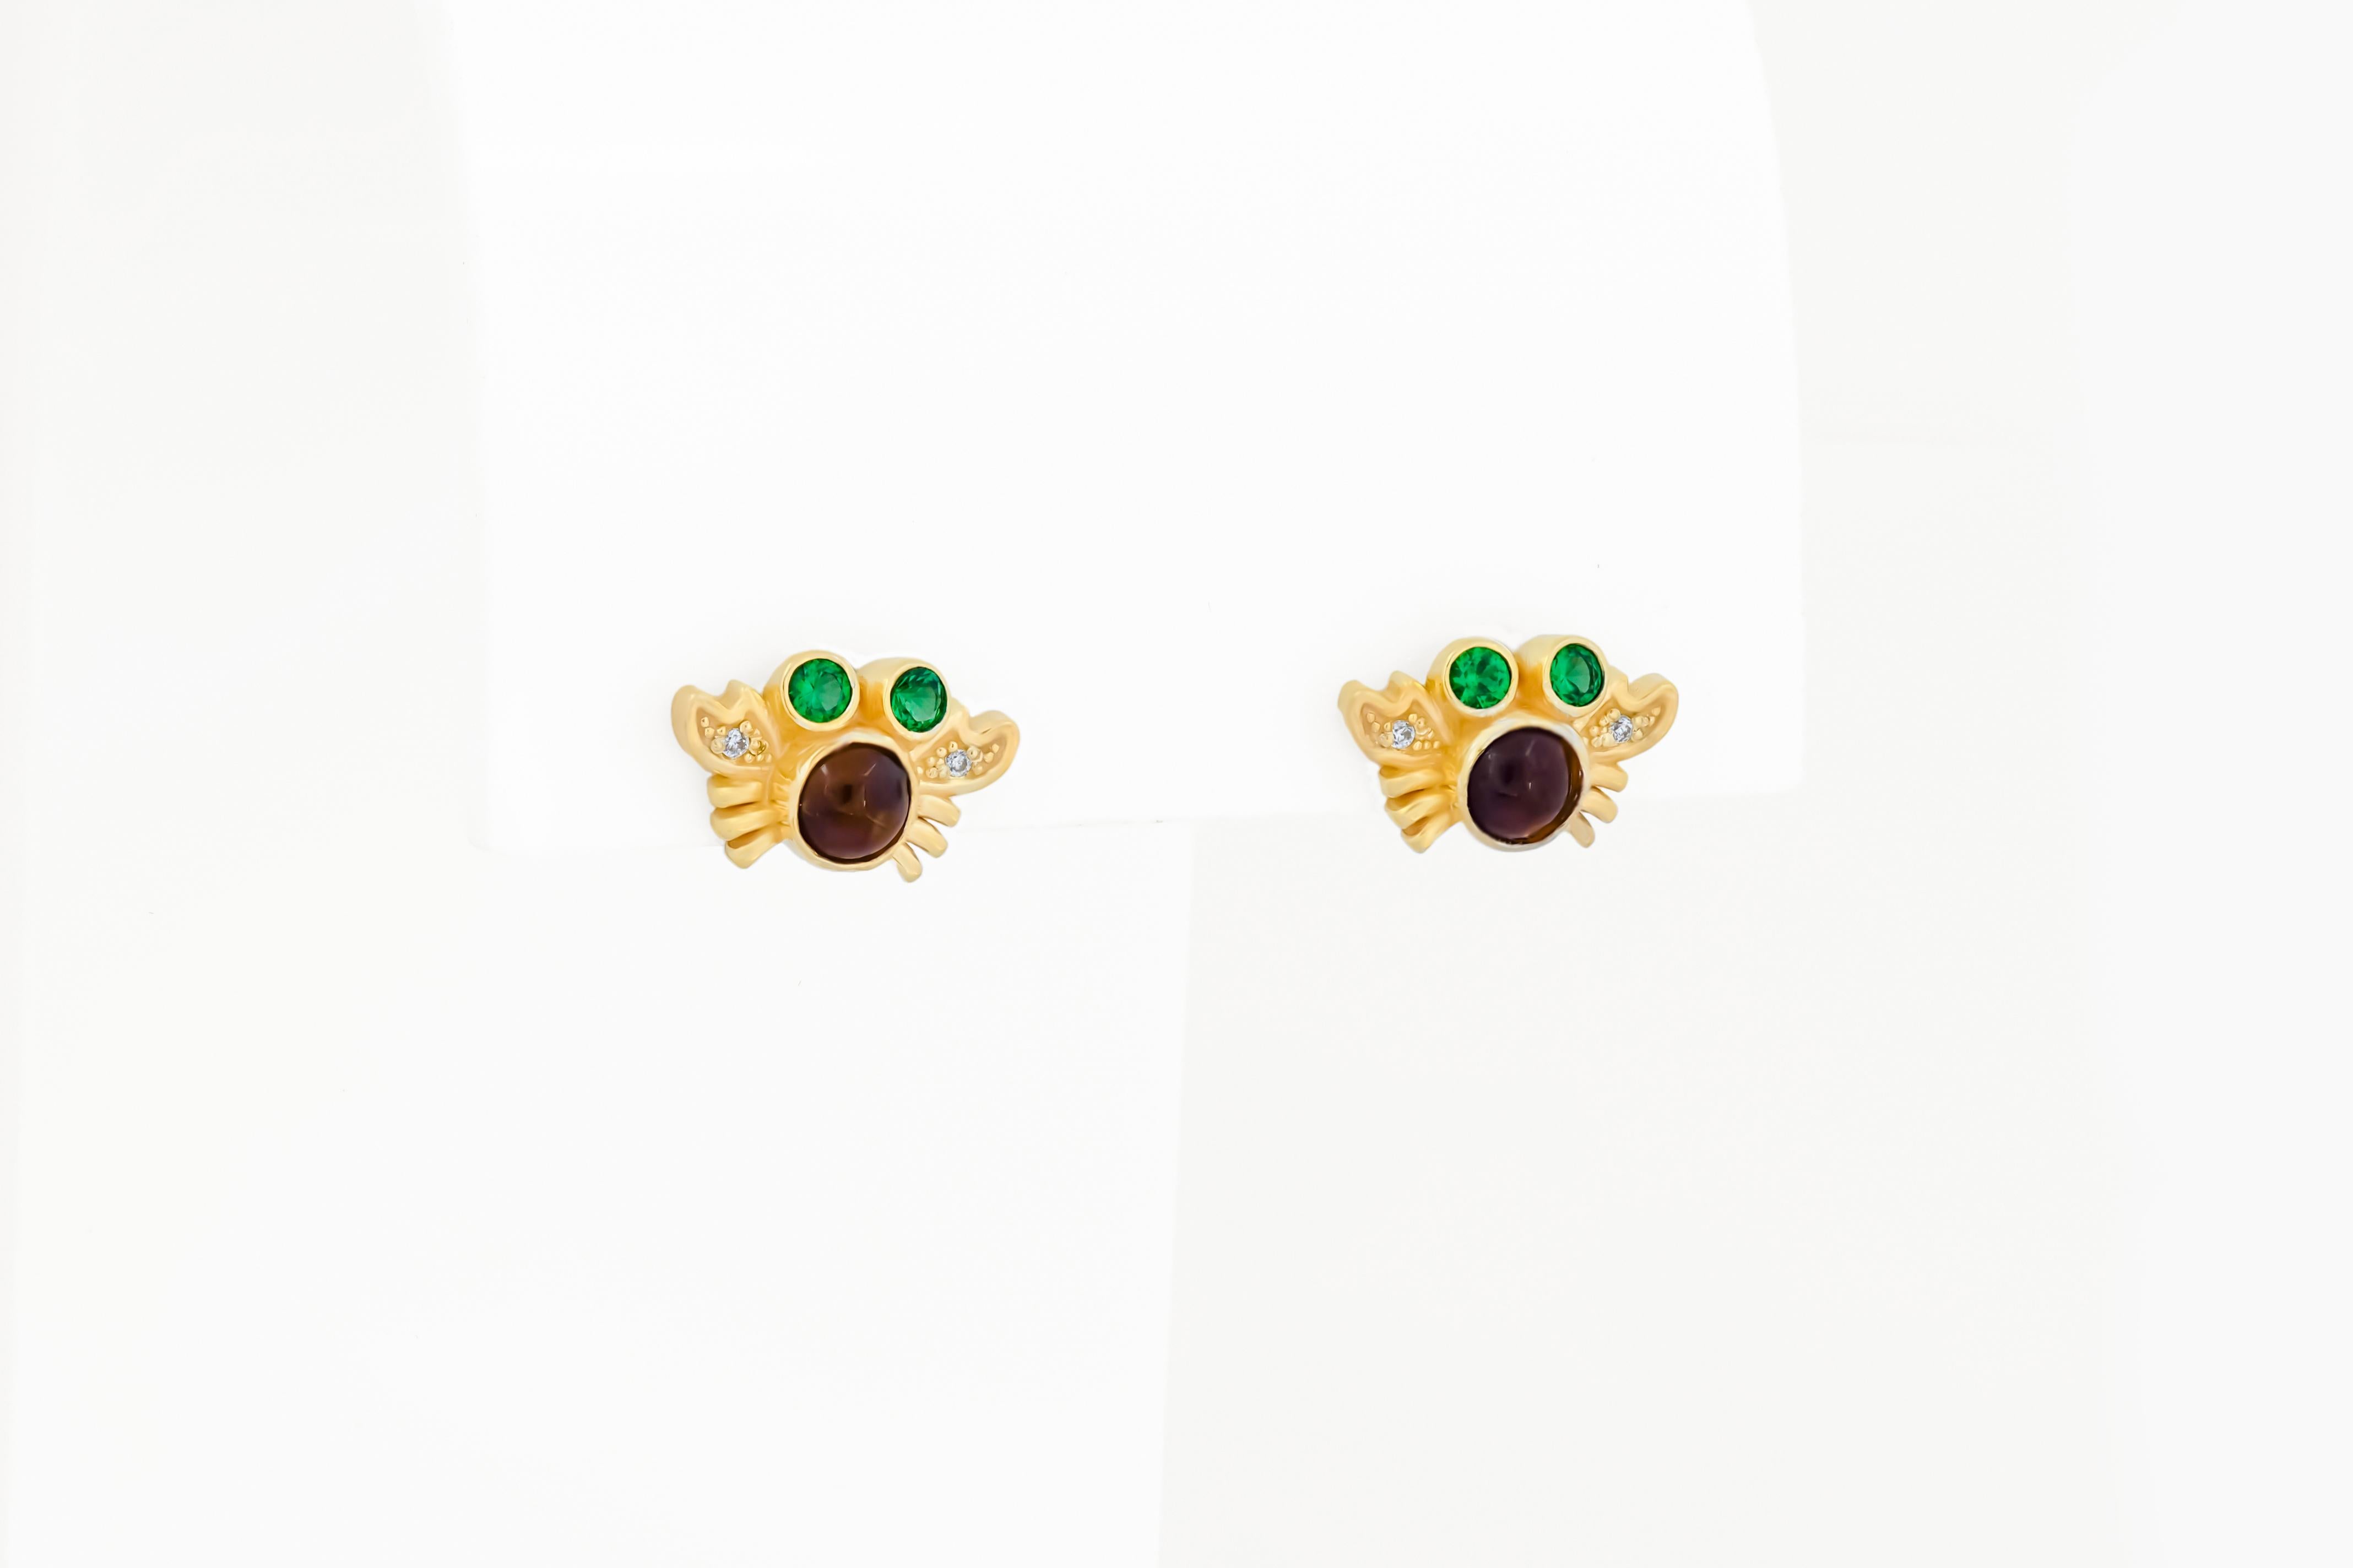 Fish, flower and crab earrings studs. Animal earrings. Silver earrings studs. 

Metal: silver 925 covered 14k gold

Weight: 4.2 gr  
Crab earrings size: 10x8 mm
Fish size: 18x16mm
Flower size: 9x9 mm
Gemstones:
Crab: 2 round garnets orange to brown